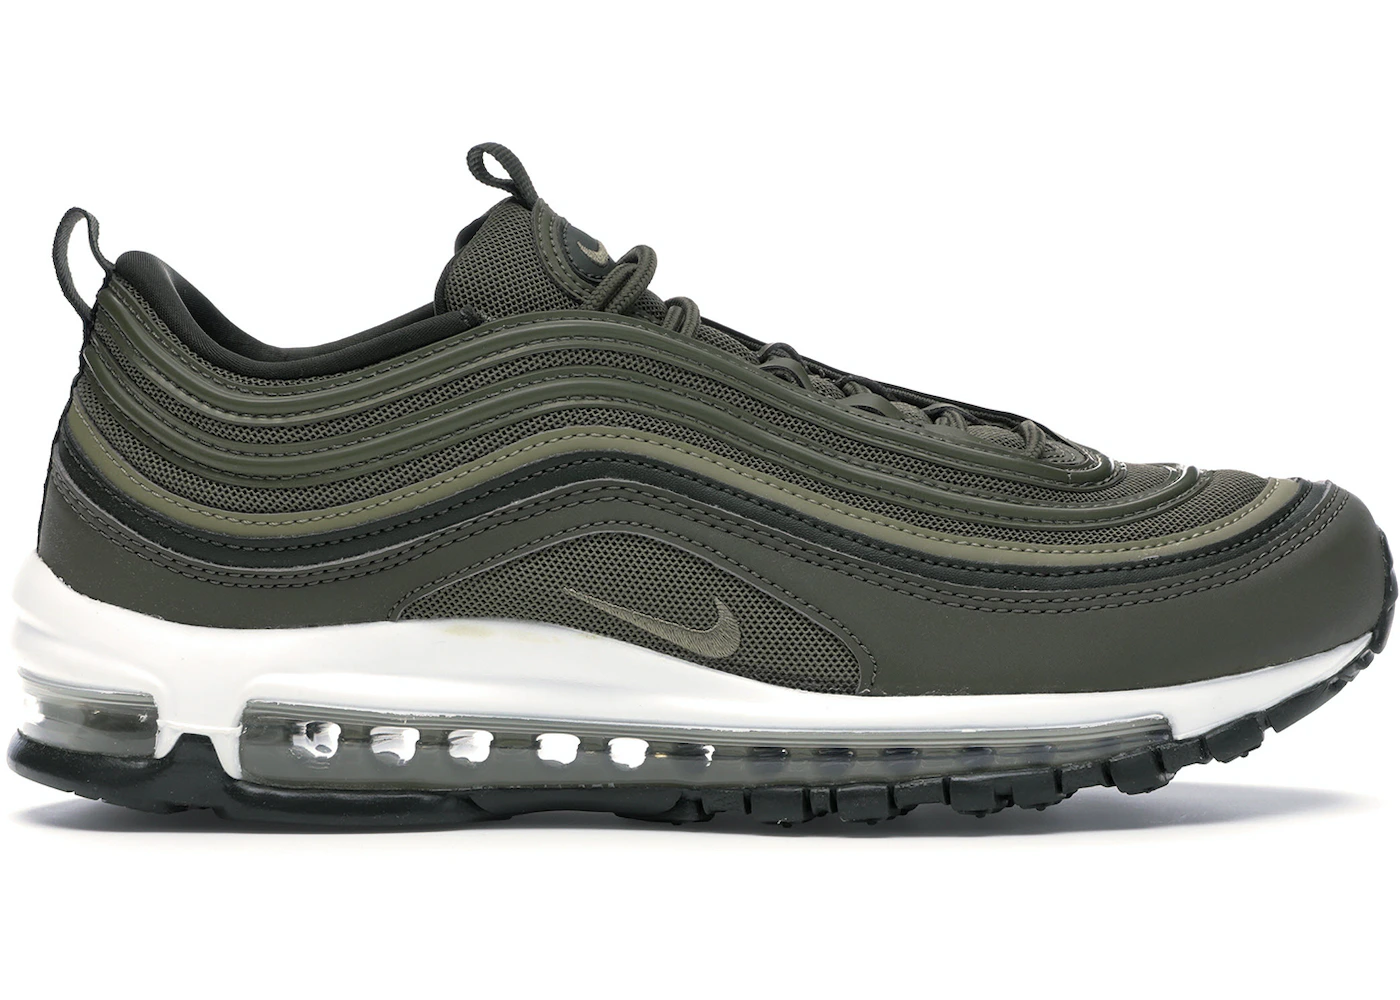 Nike Air Max 97 Olive (Women's) - 921733-200 - US